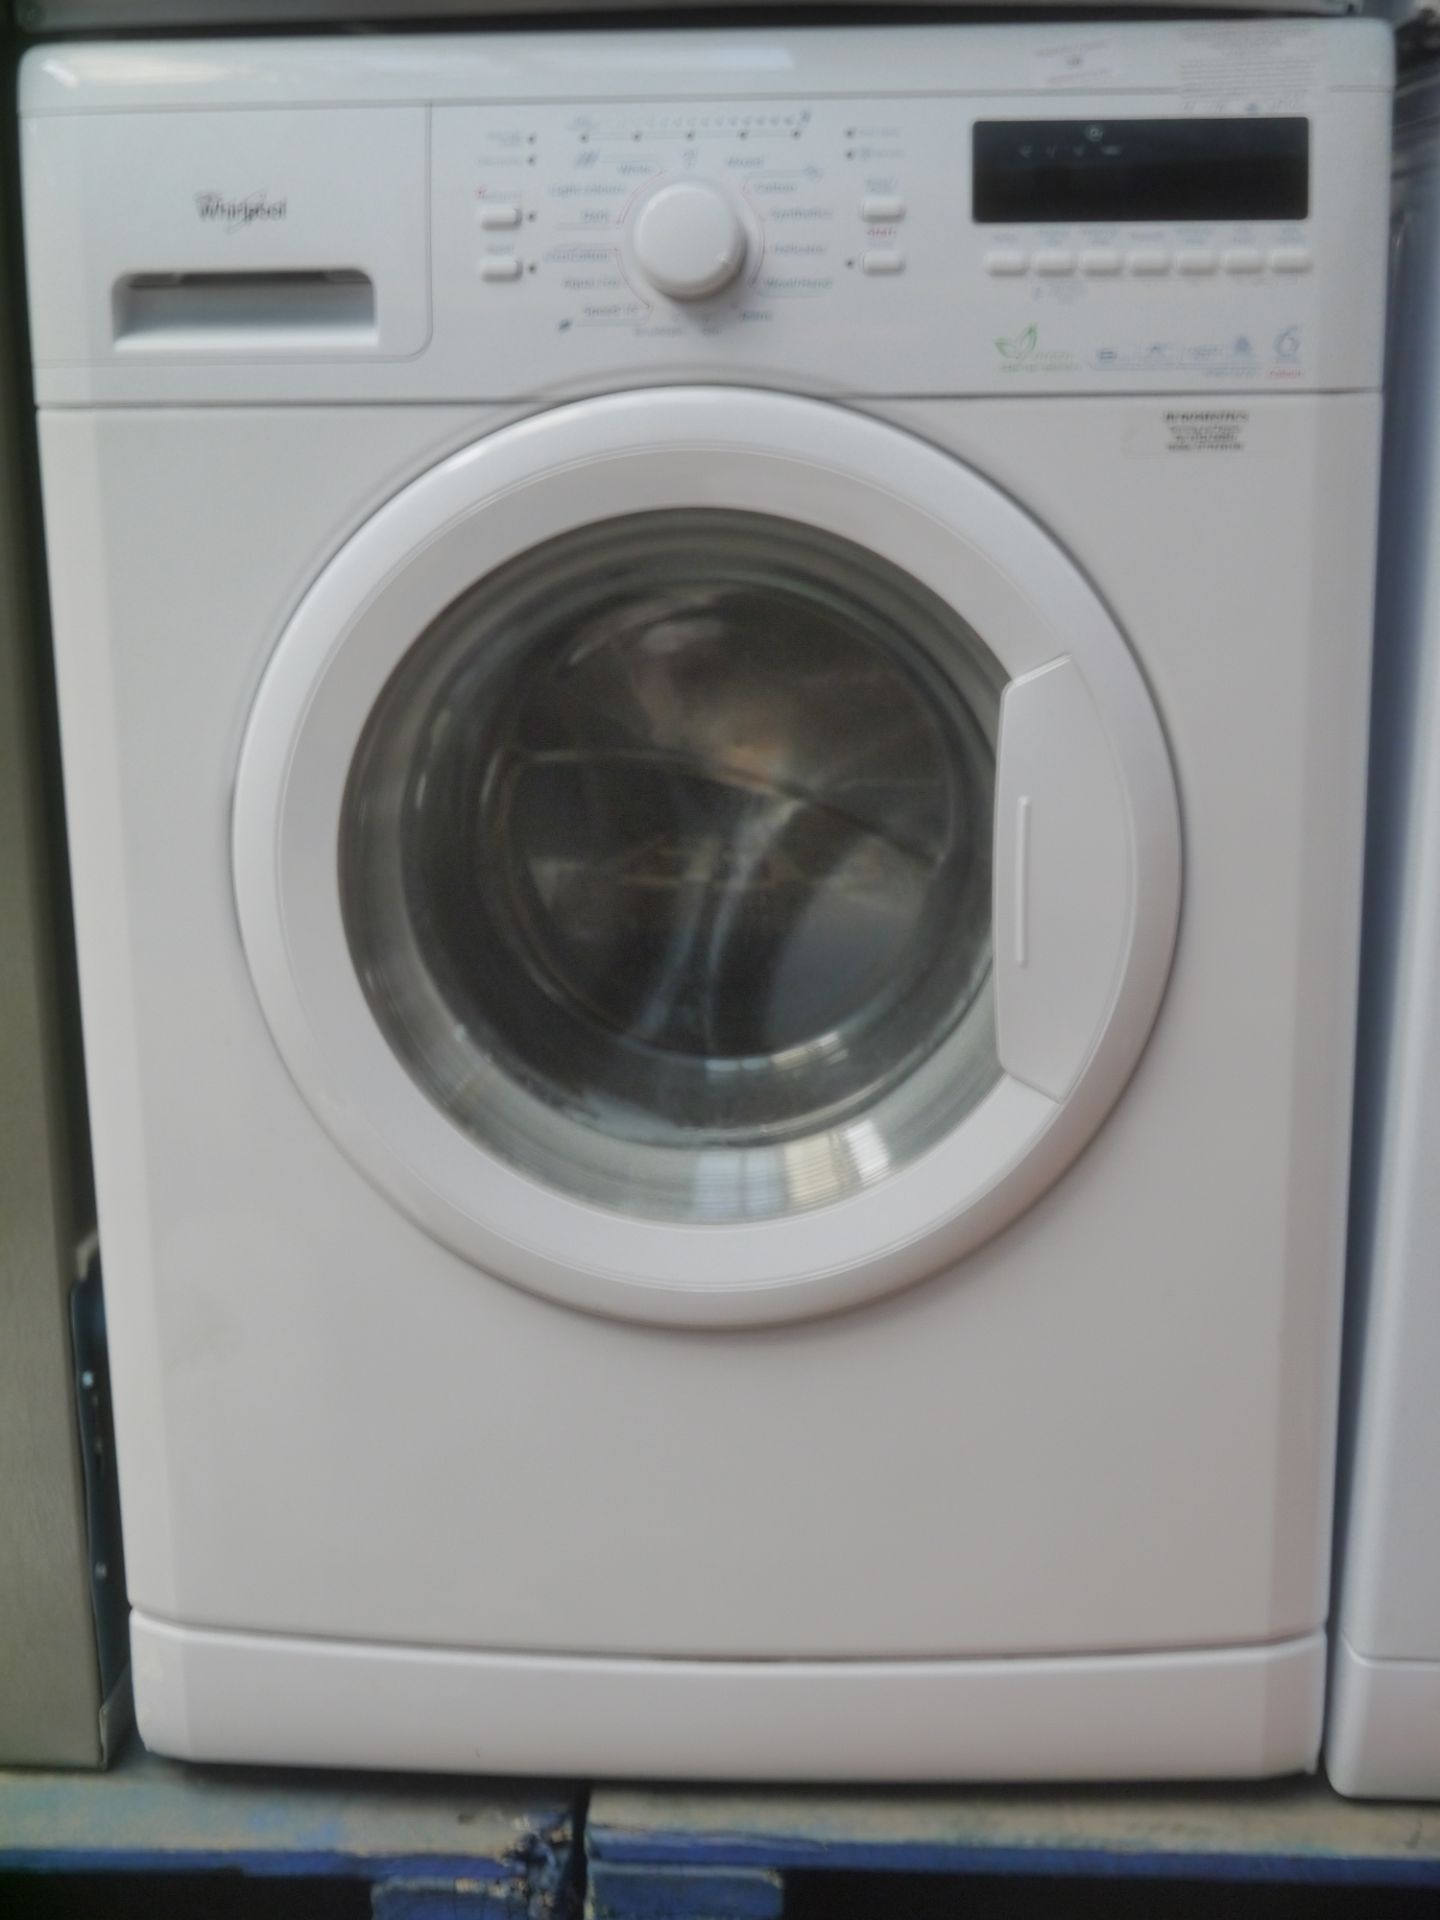 Whirlpool 8kg washing machine, powers on and spins.